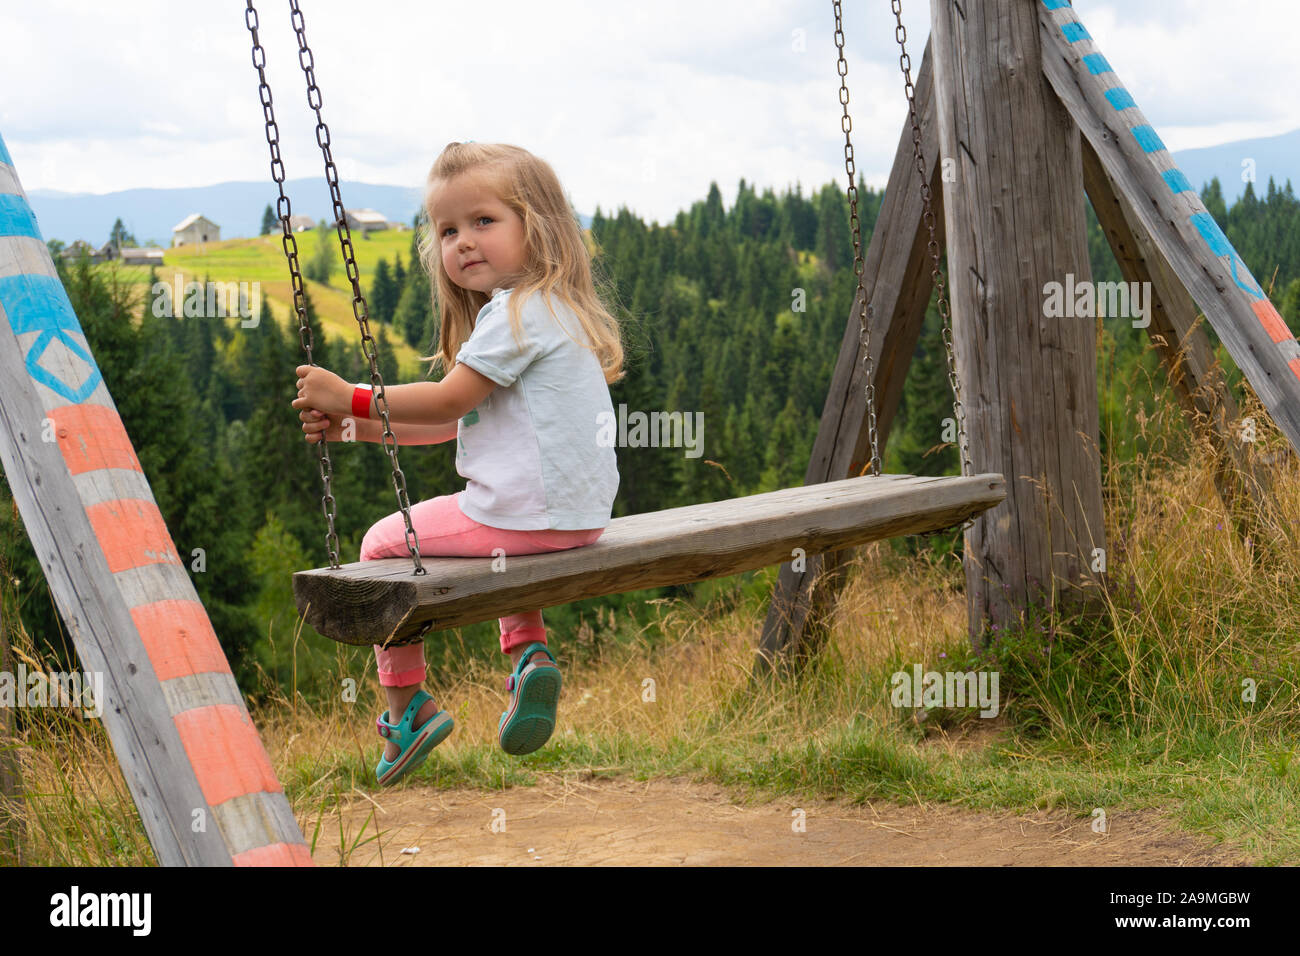 Little girl swinging on swing with mountain view on background Stock Photo